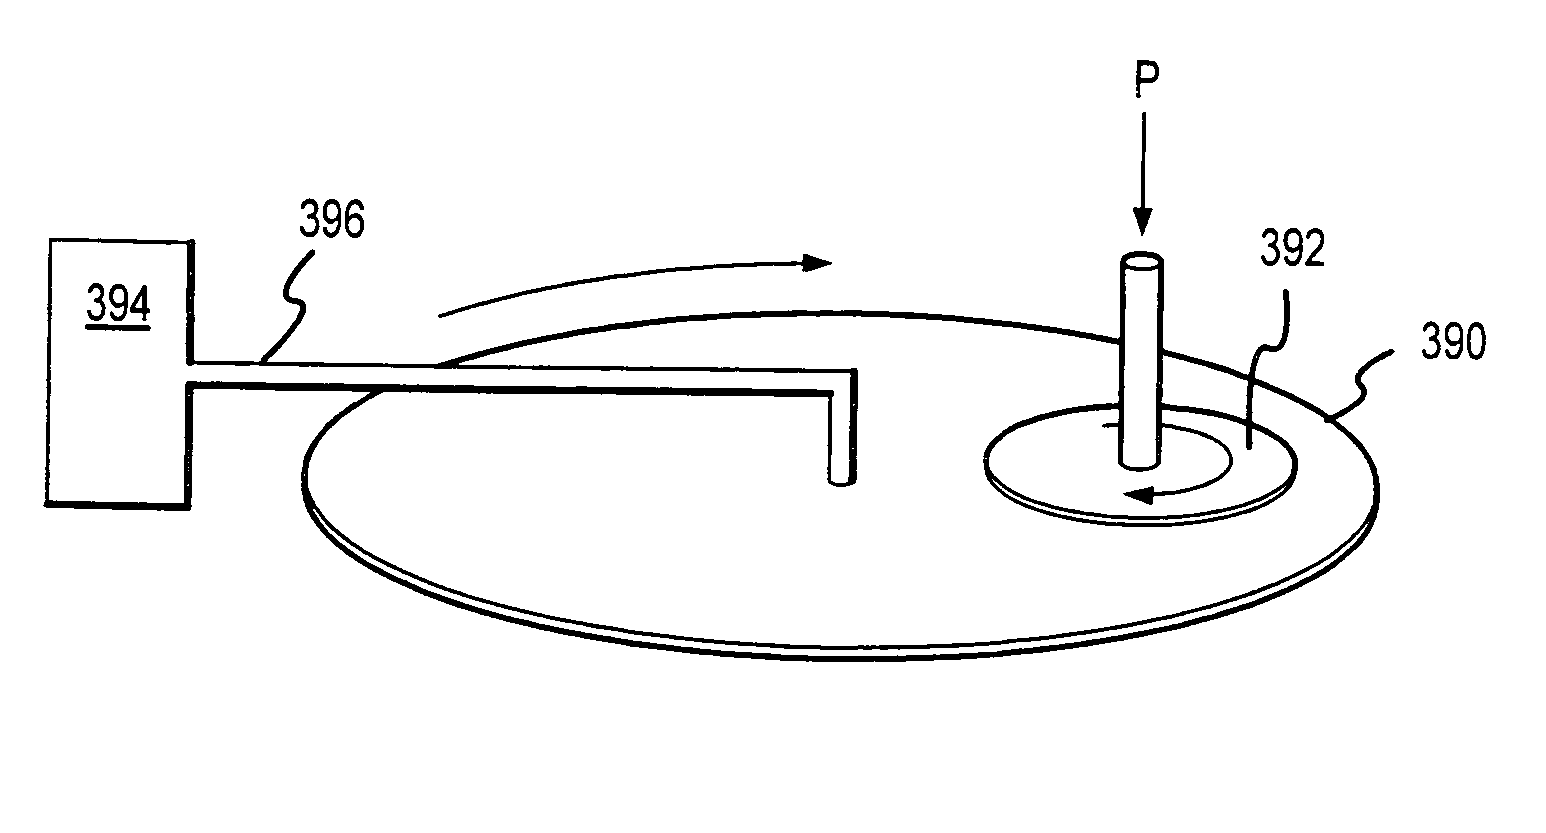 Chemical-mechanical planarization slurries and powders and methods for using same